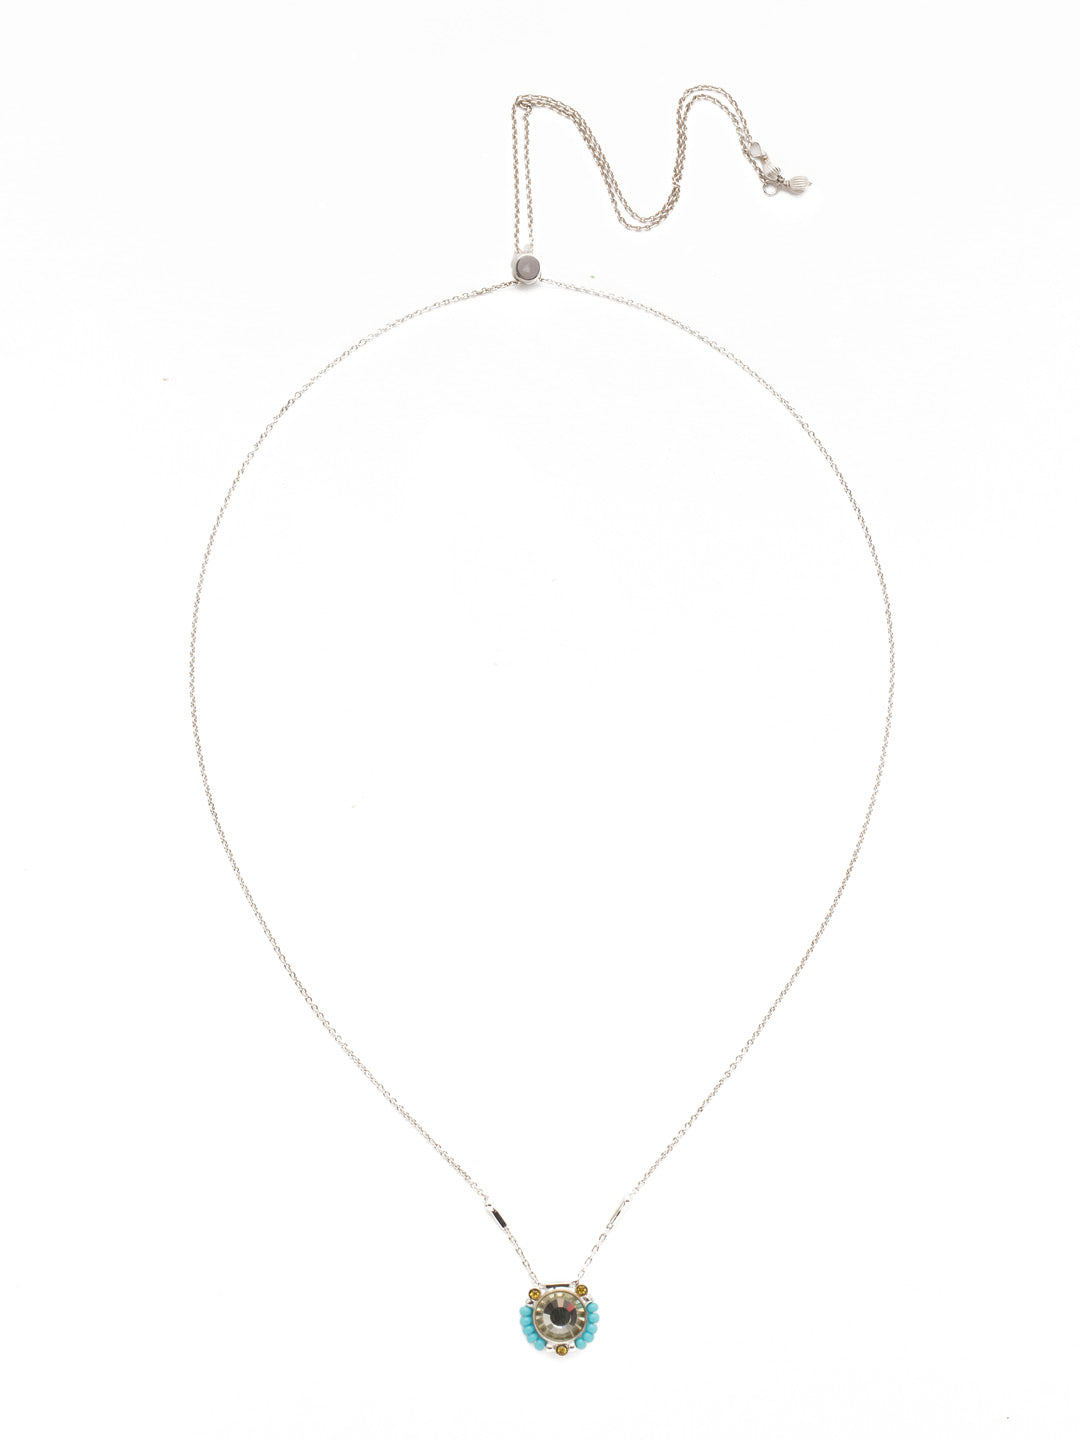 Ebe Classic Necklace - NEH9RHTHT